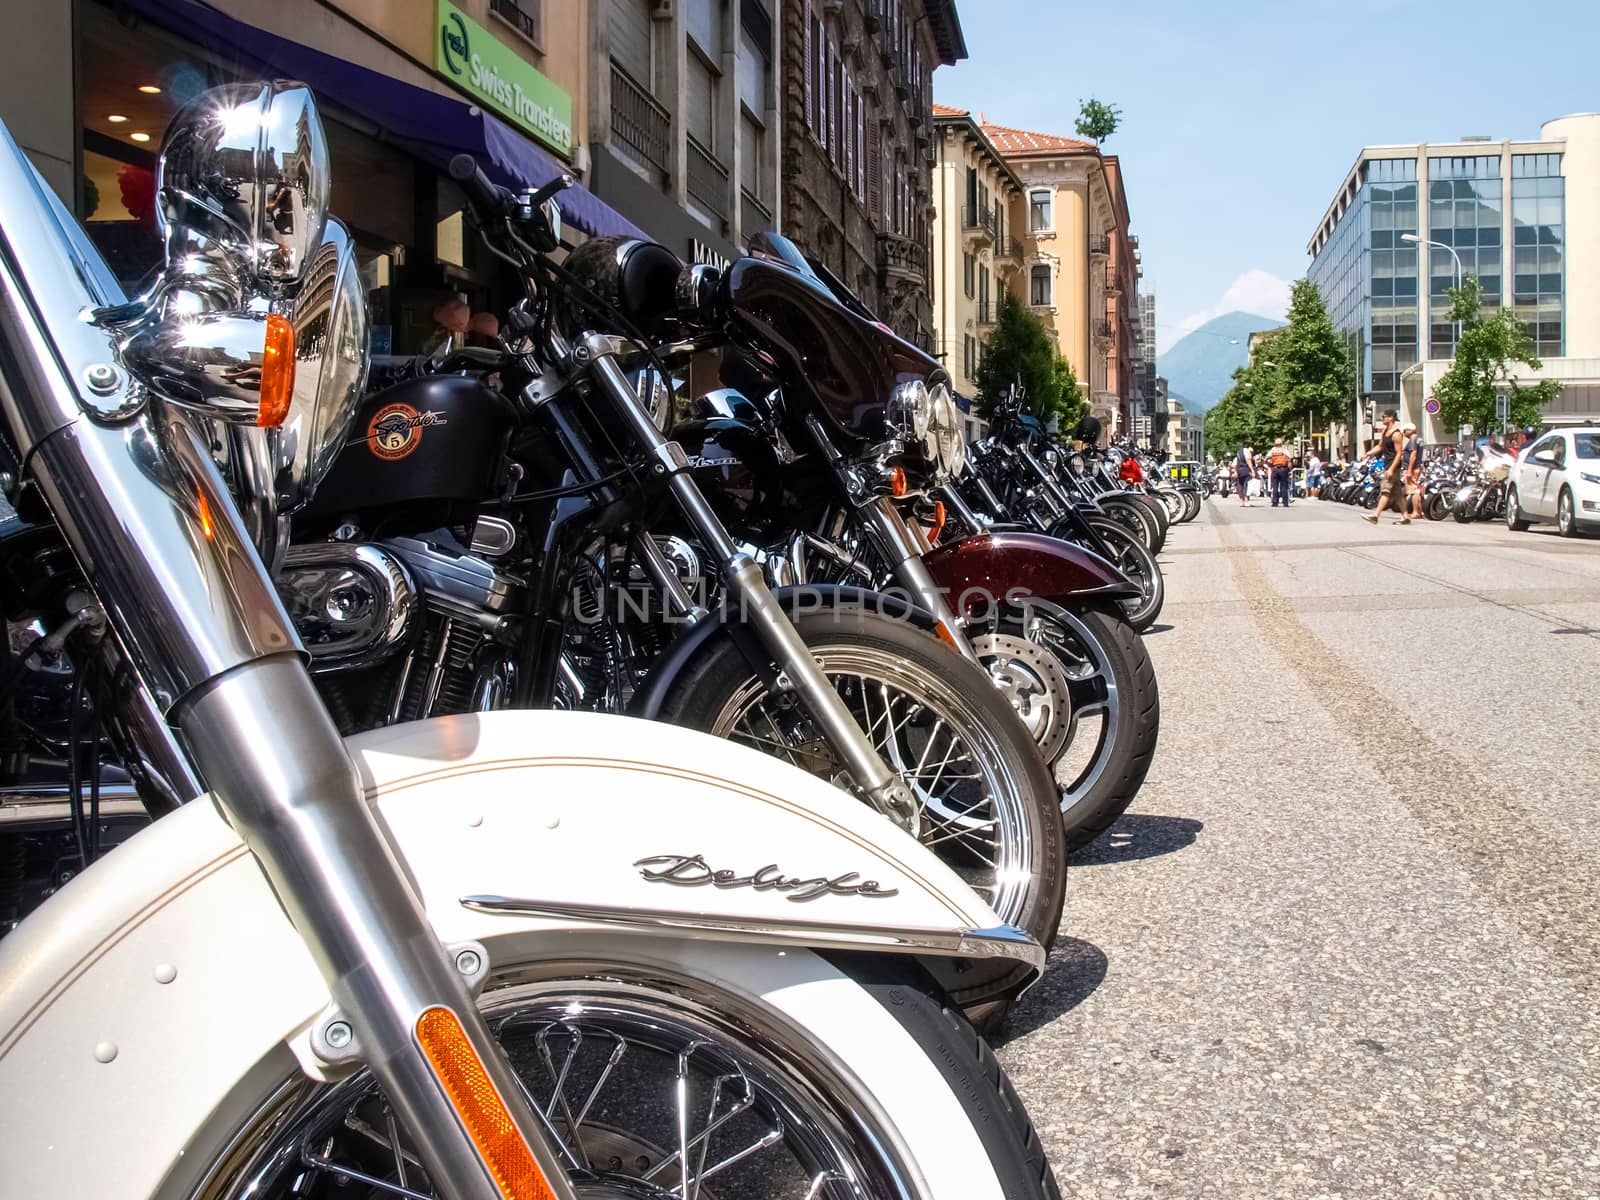 Third edition of Swiss Harley days by mauro_piccardi